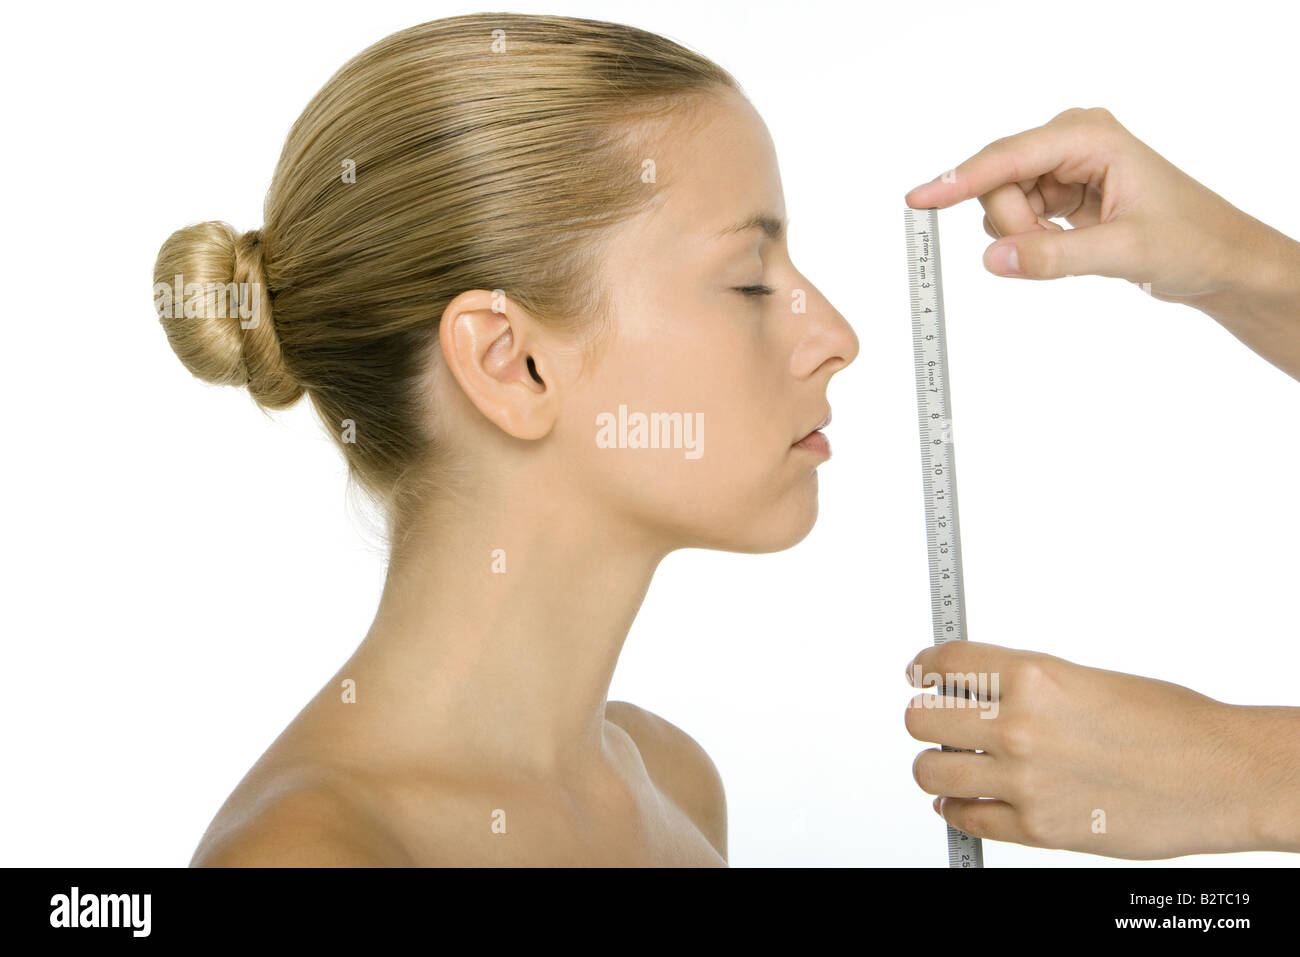 Woman in profile, face being measured with ruler Stock Photo